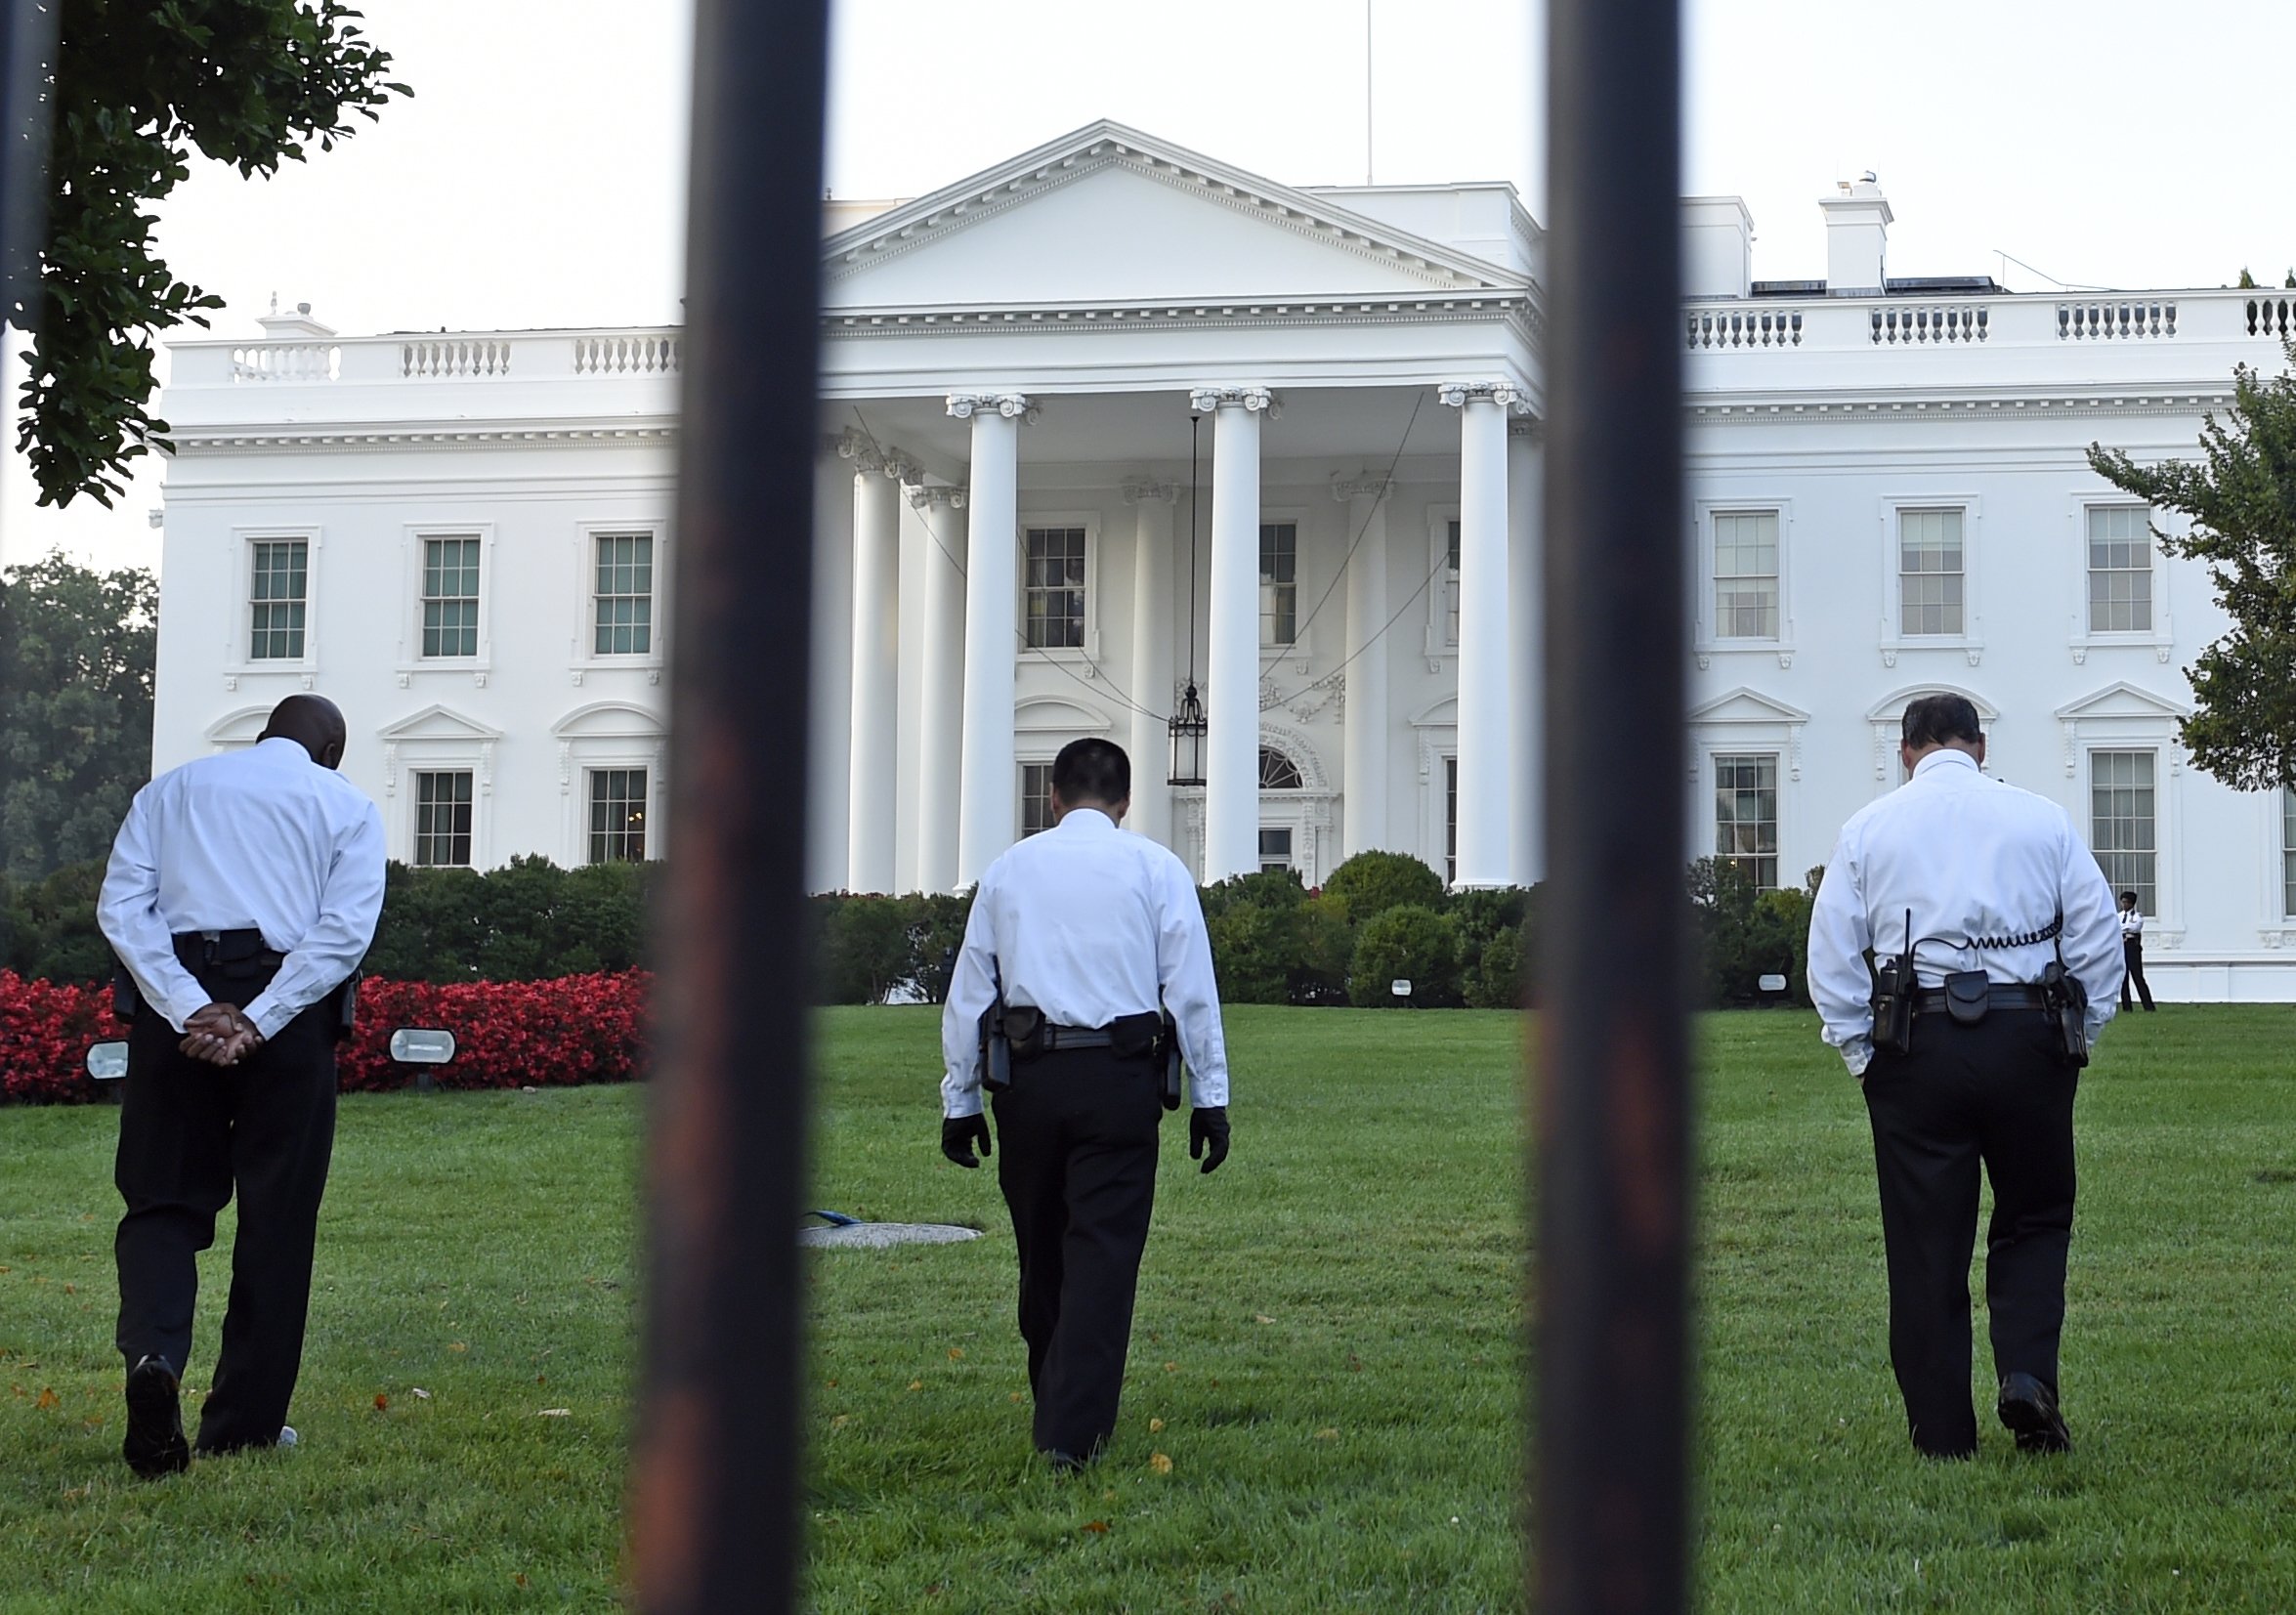 Uniformed Secret Service officers walk along the lawn on the North side of the White House in Washington on Sept. 20, 2014. The Secret Service is coming under renewed scrutiny after a man scaled the White House fence and made it all the way through the front door before he was apprehended. (Susan Walsh—AP)